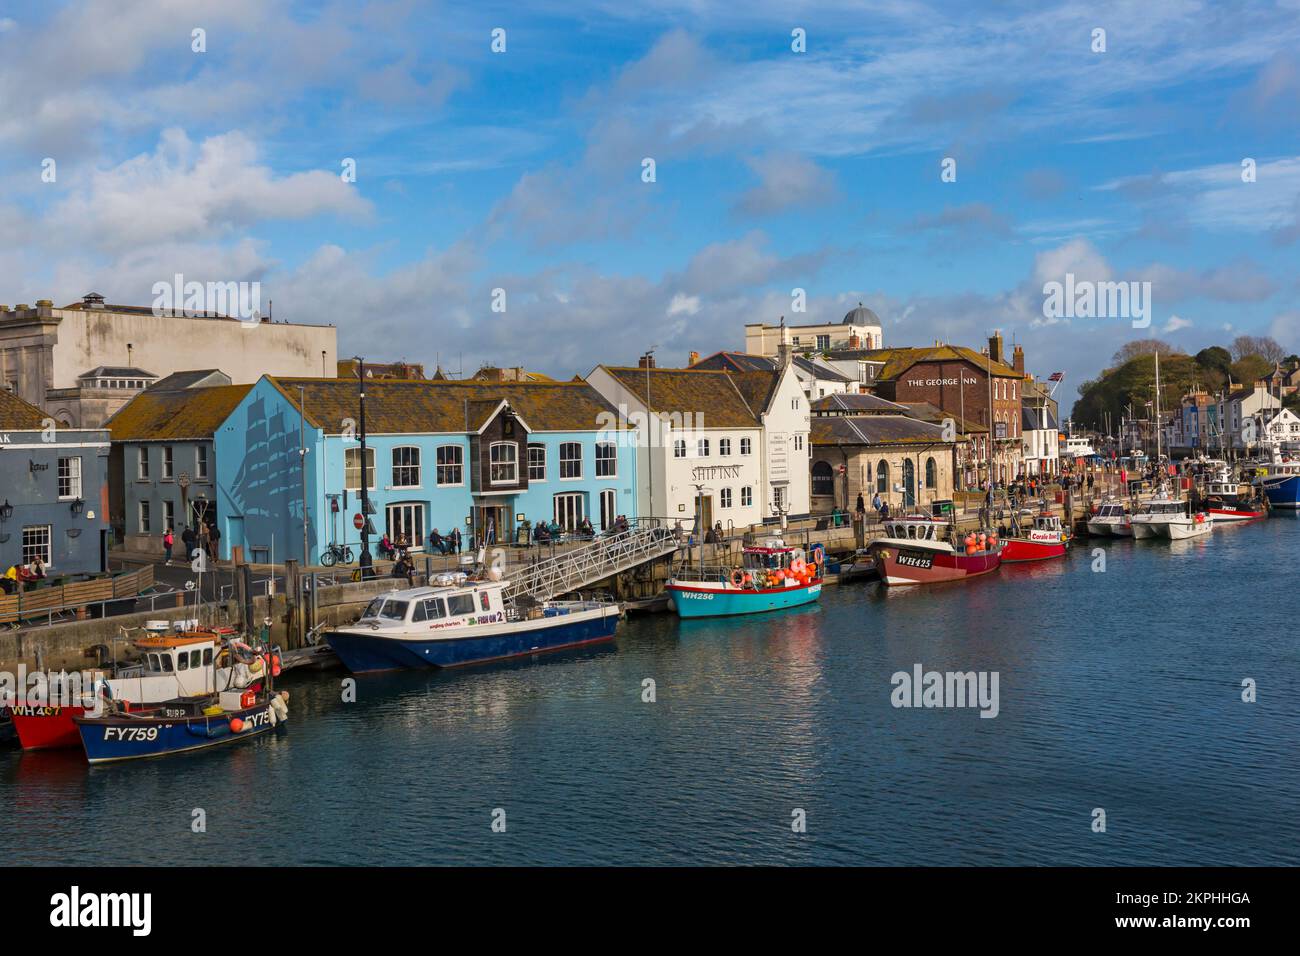 Boats moored along harbourside at Weymouth harbour, Weymouth quay at Weymouth, Dorset UK in October Stock Photo